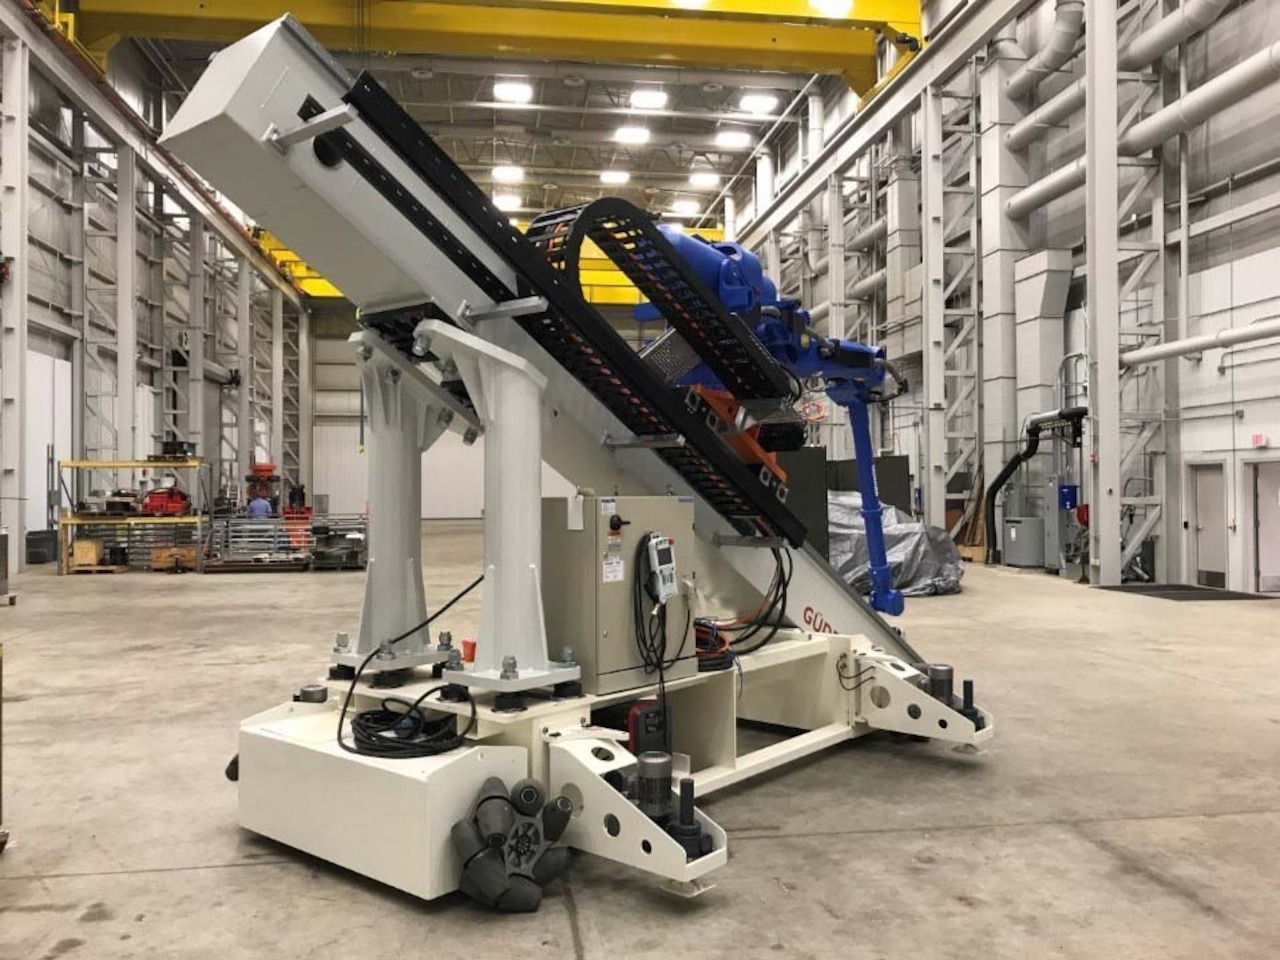 A robot for aerospace applications features advanced automation capabilities.